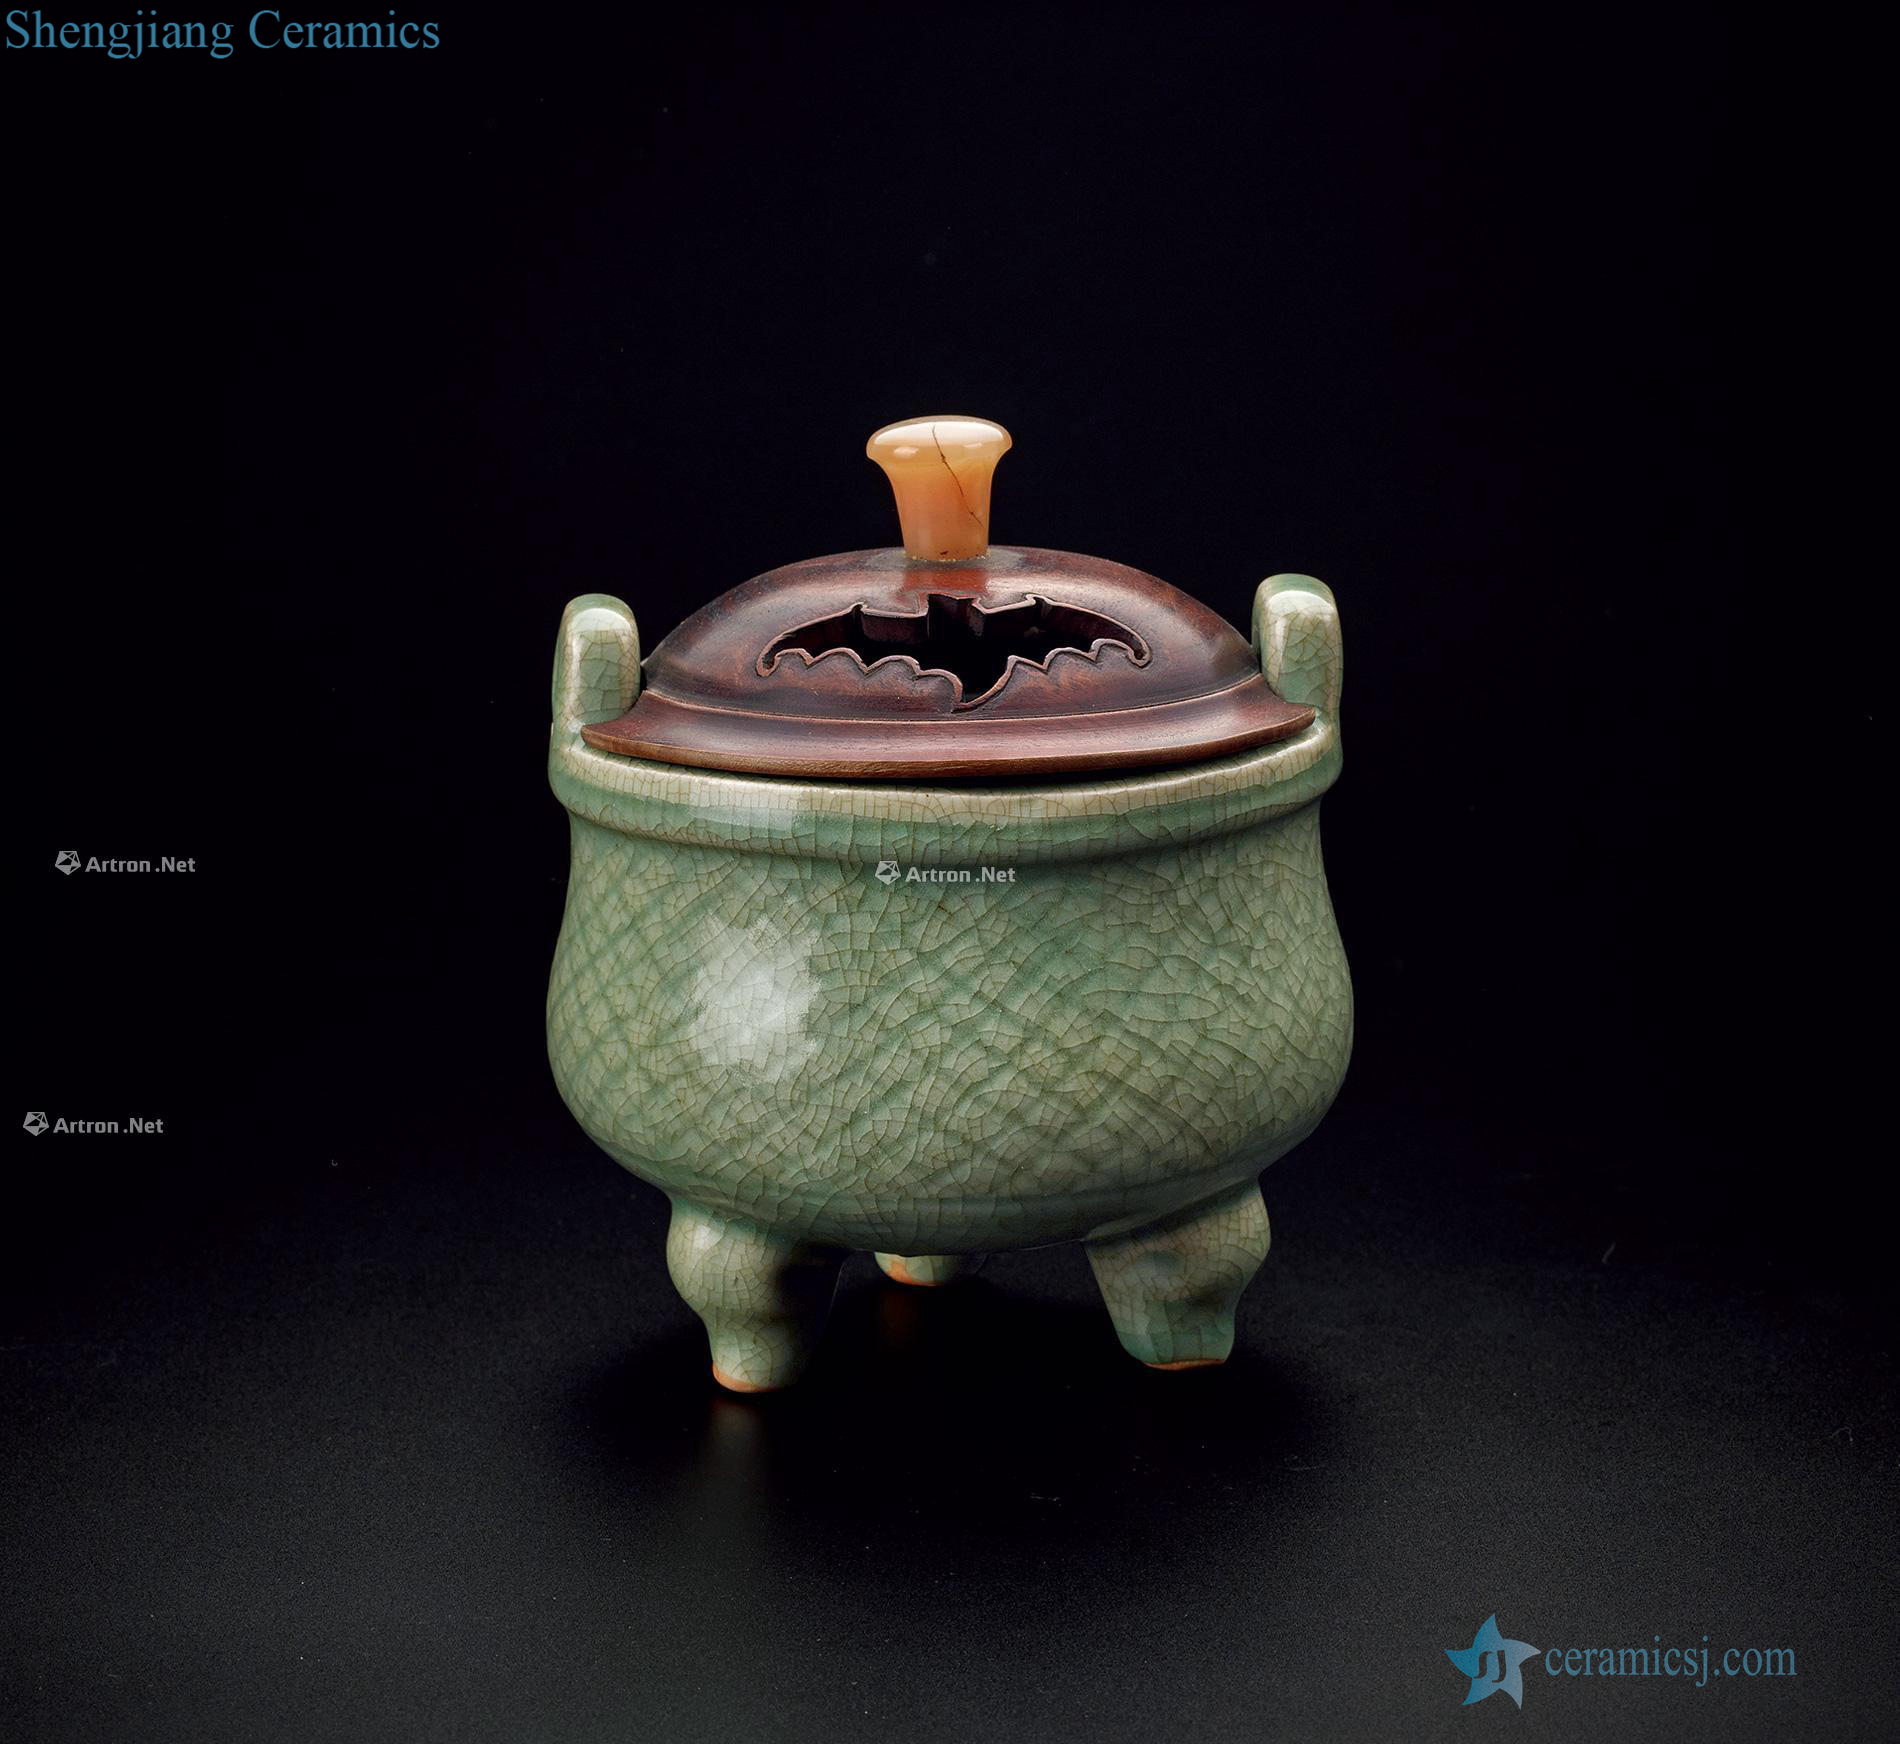 In the Ming dynasty celadon pot furnace